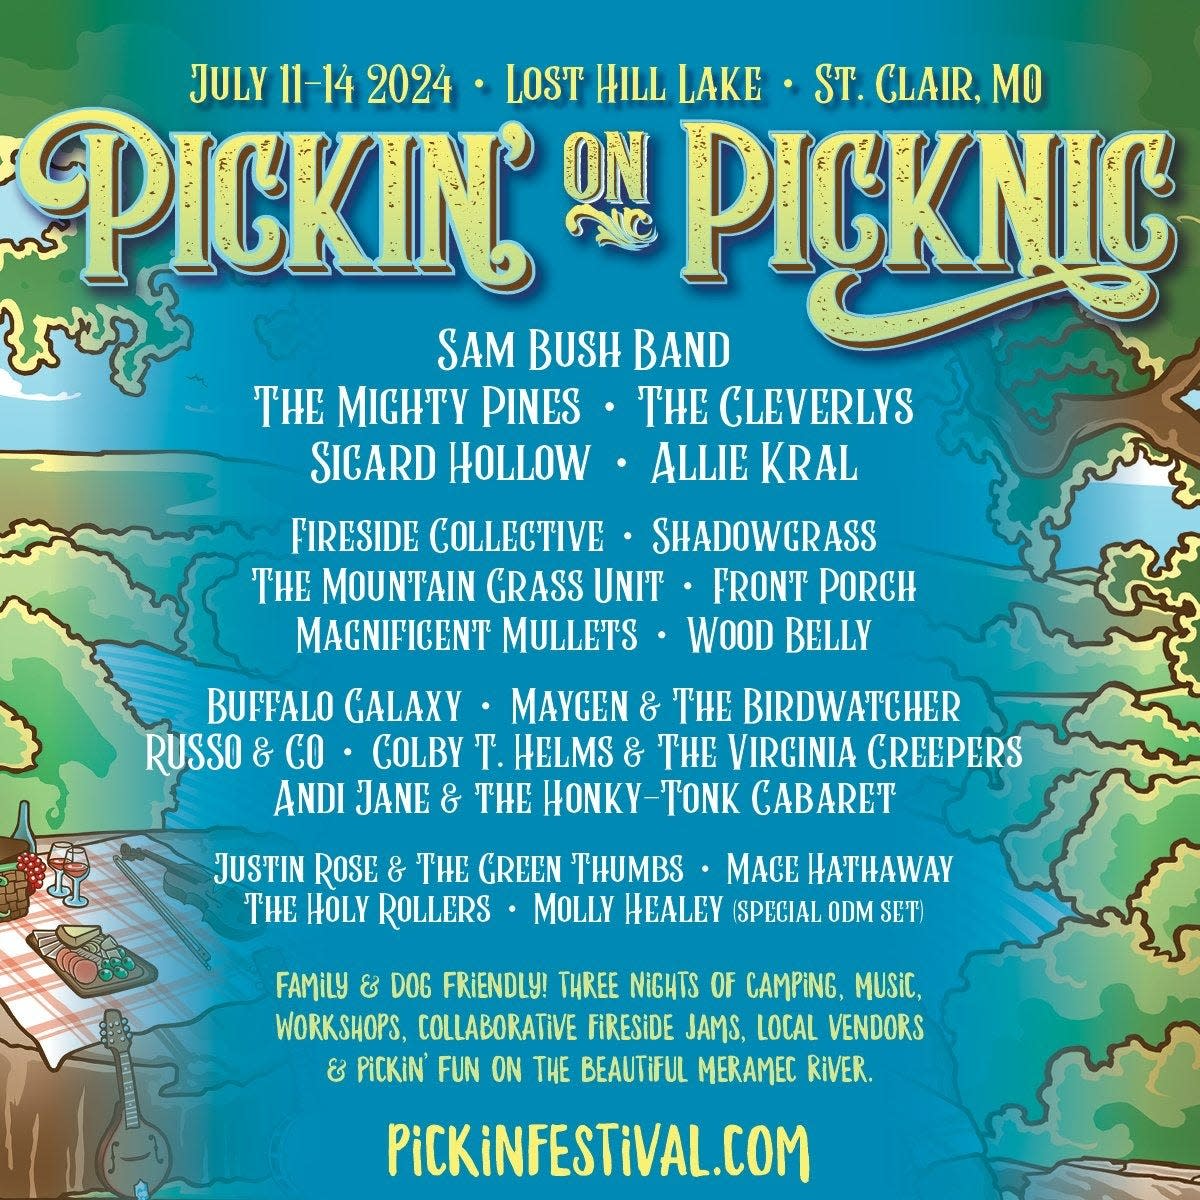 Pickin' on Picknic is July 11-14, 2024 at Lost Hill Lake in Saint Clair.